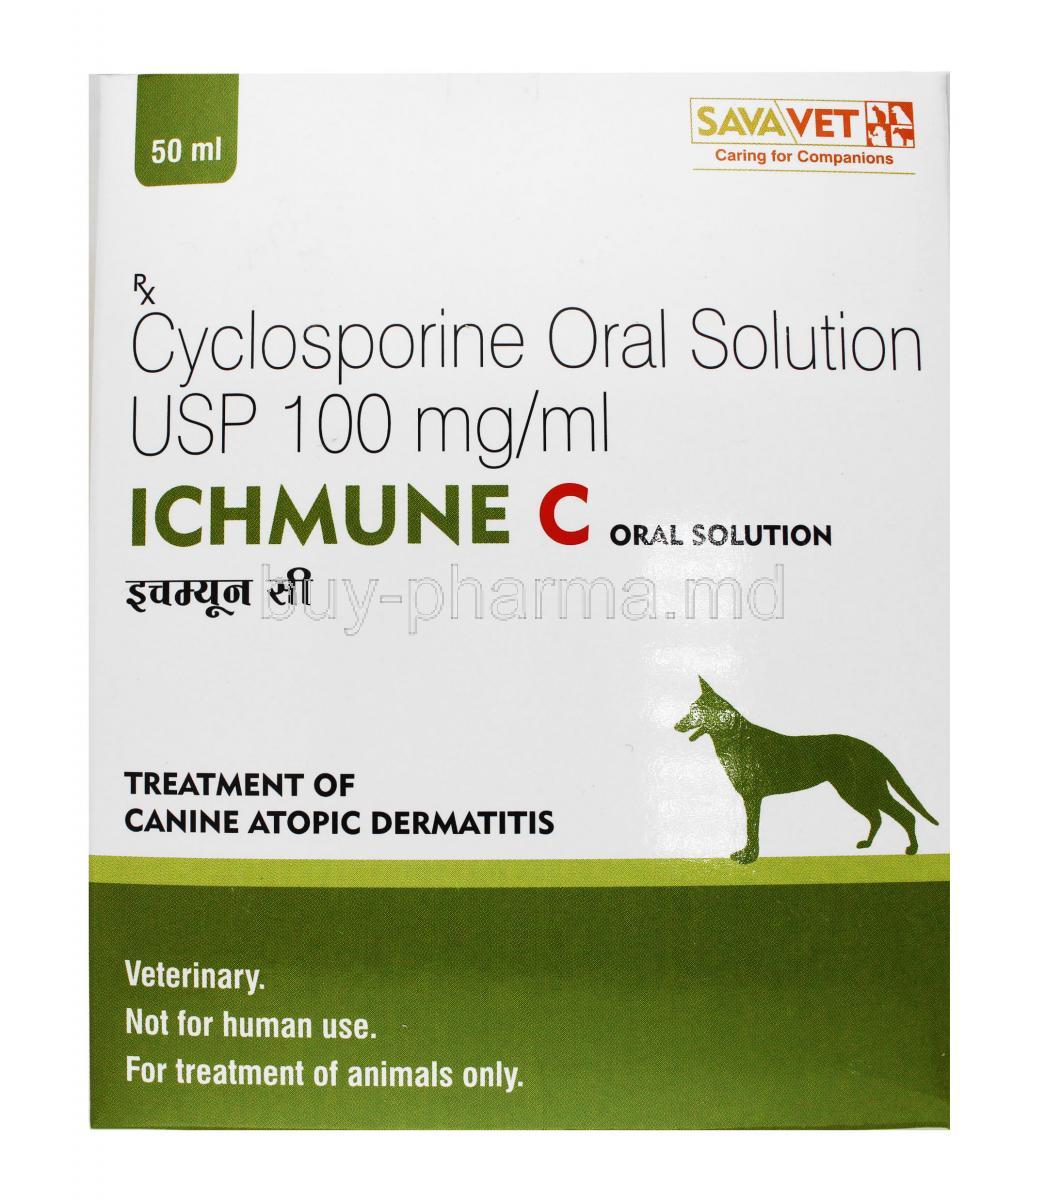 Ichmune C Oral Solution for Dogs box